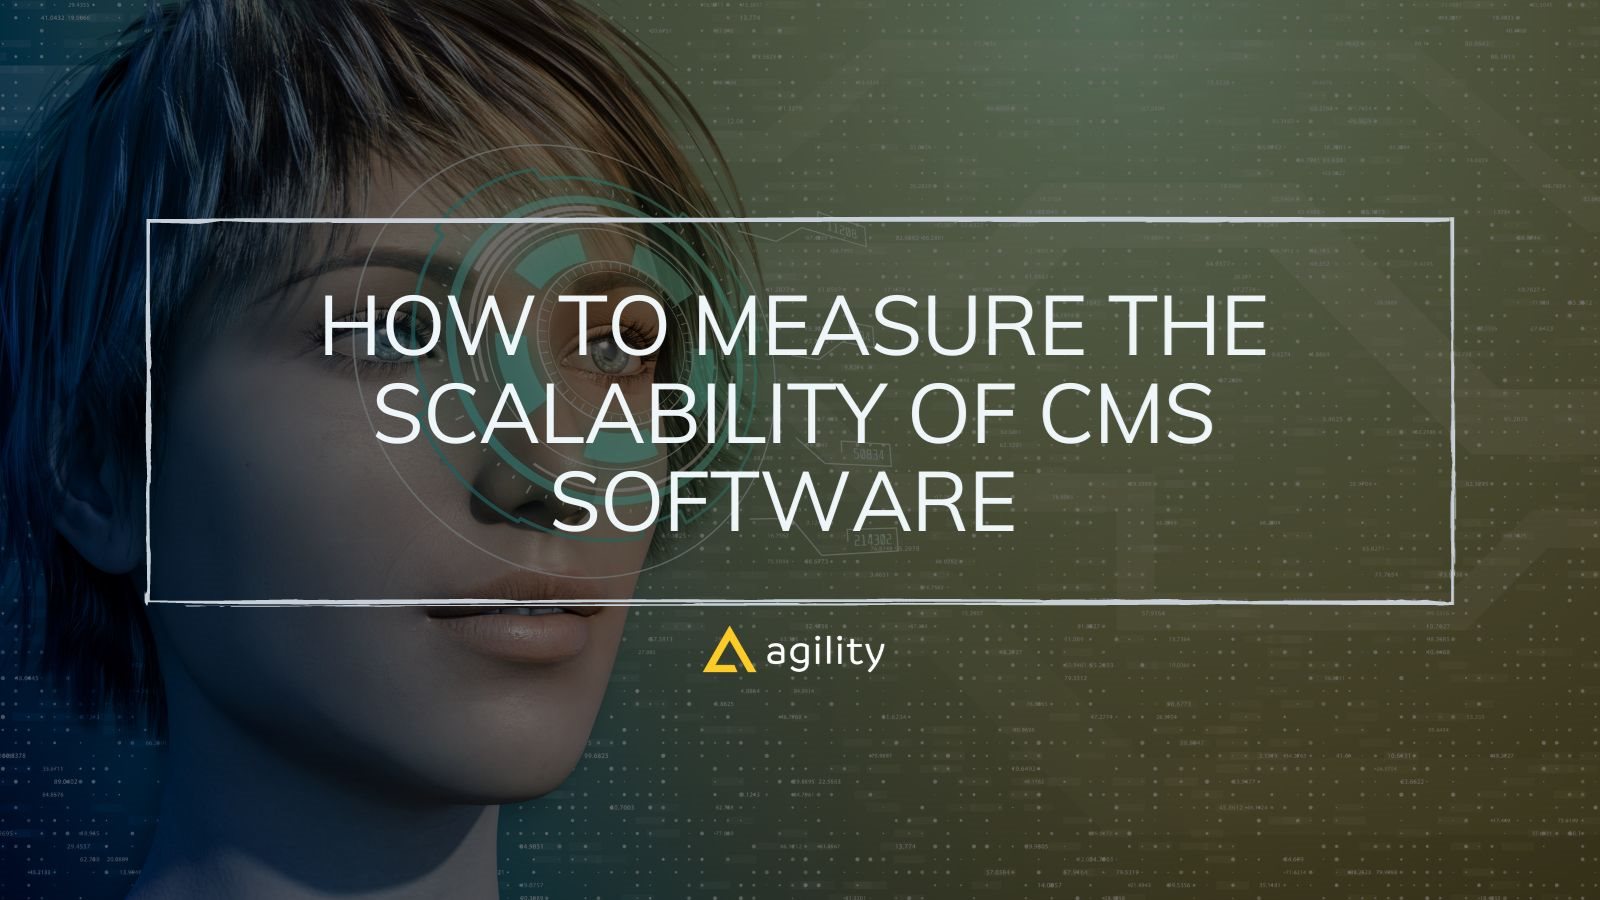 How to measure the scalability of CMS software